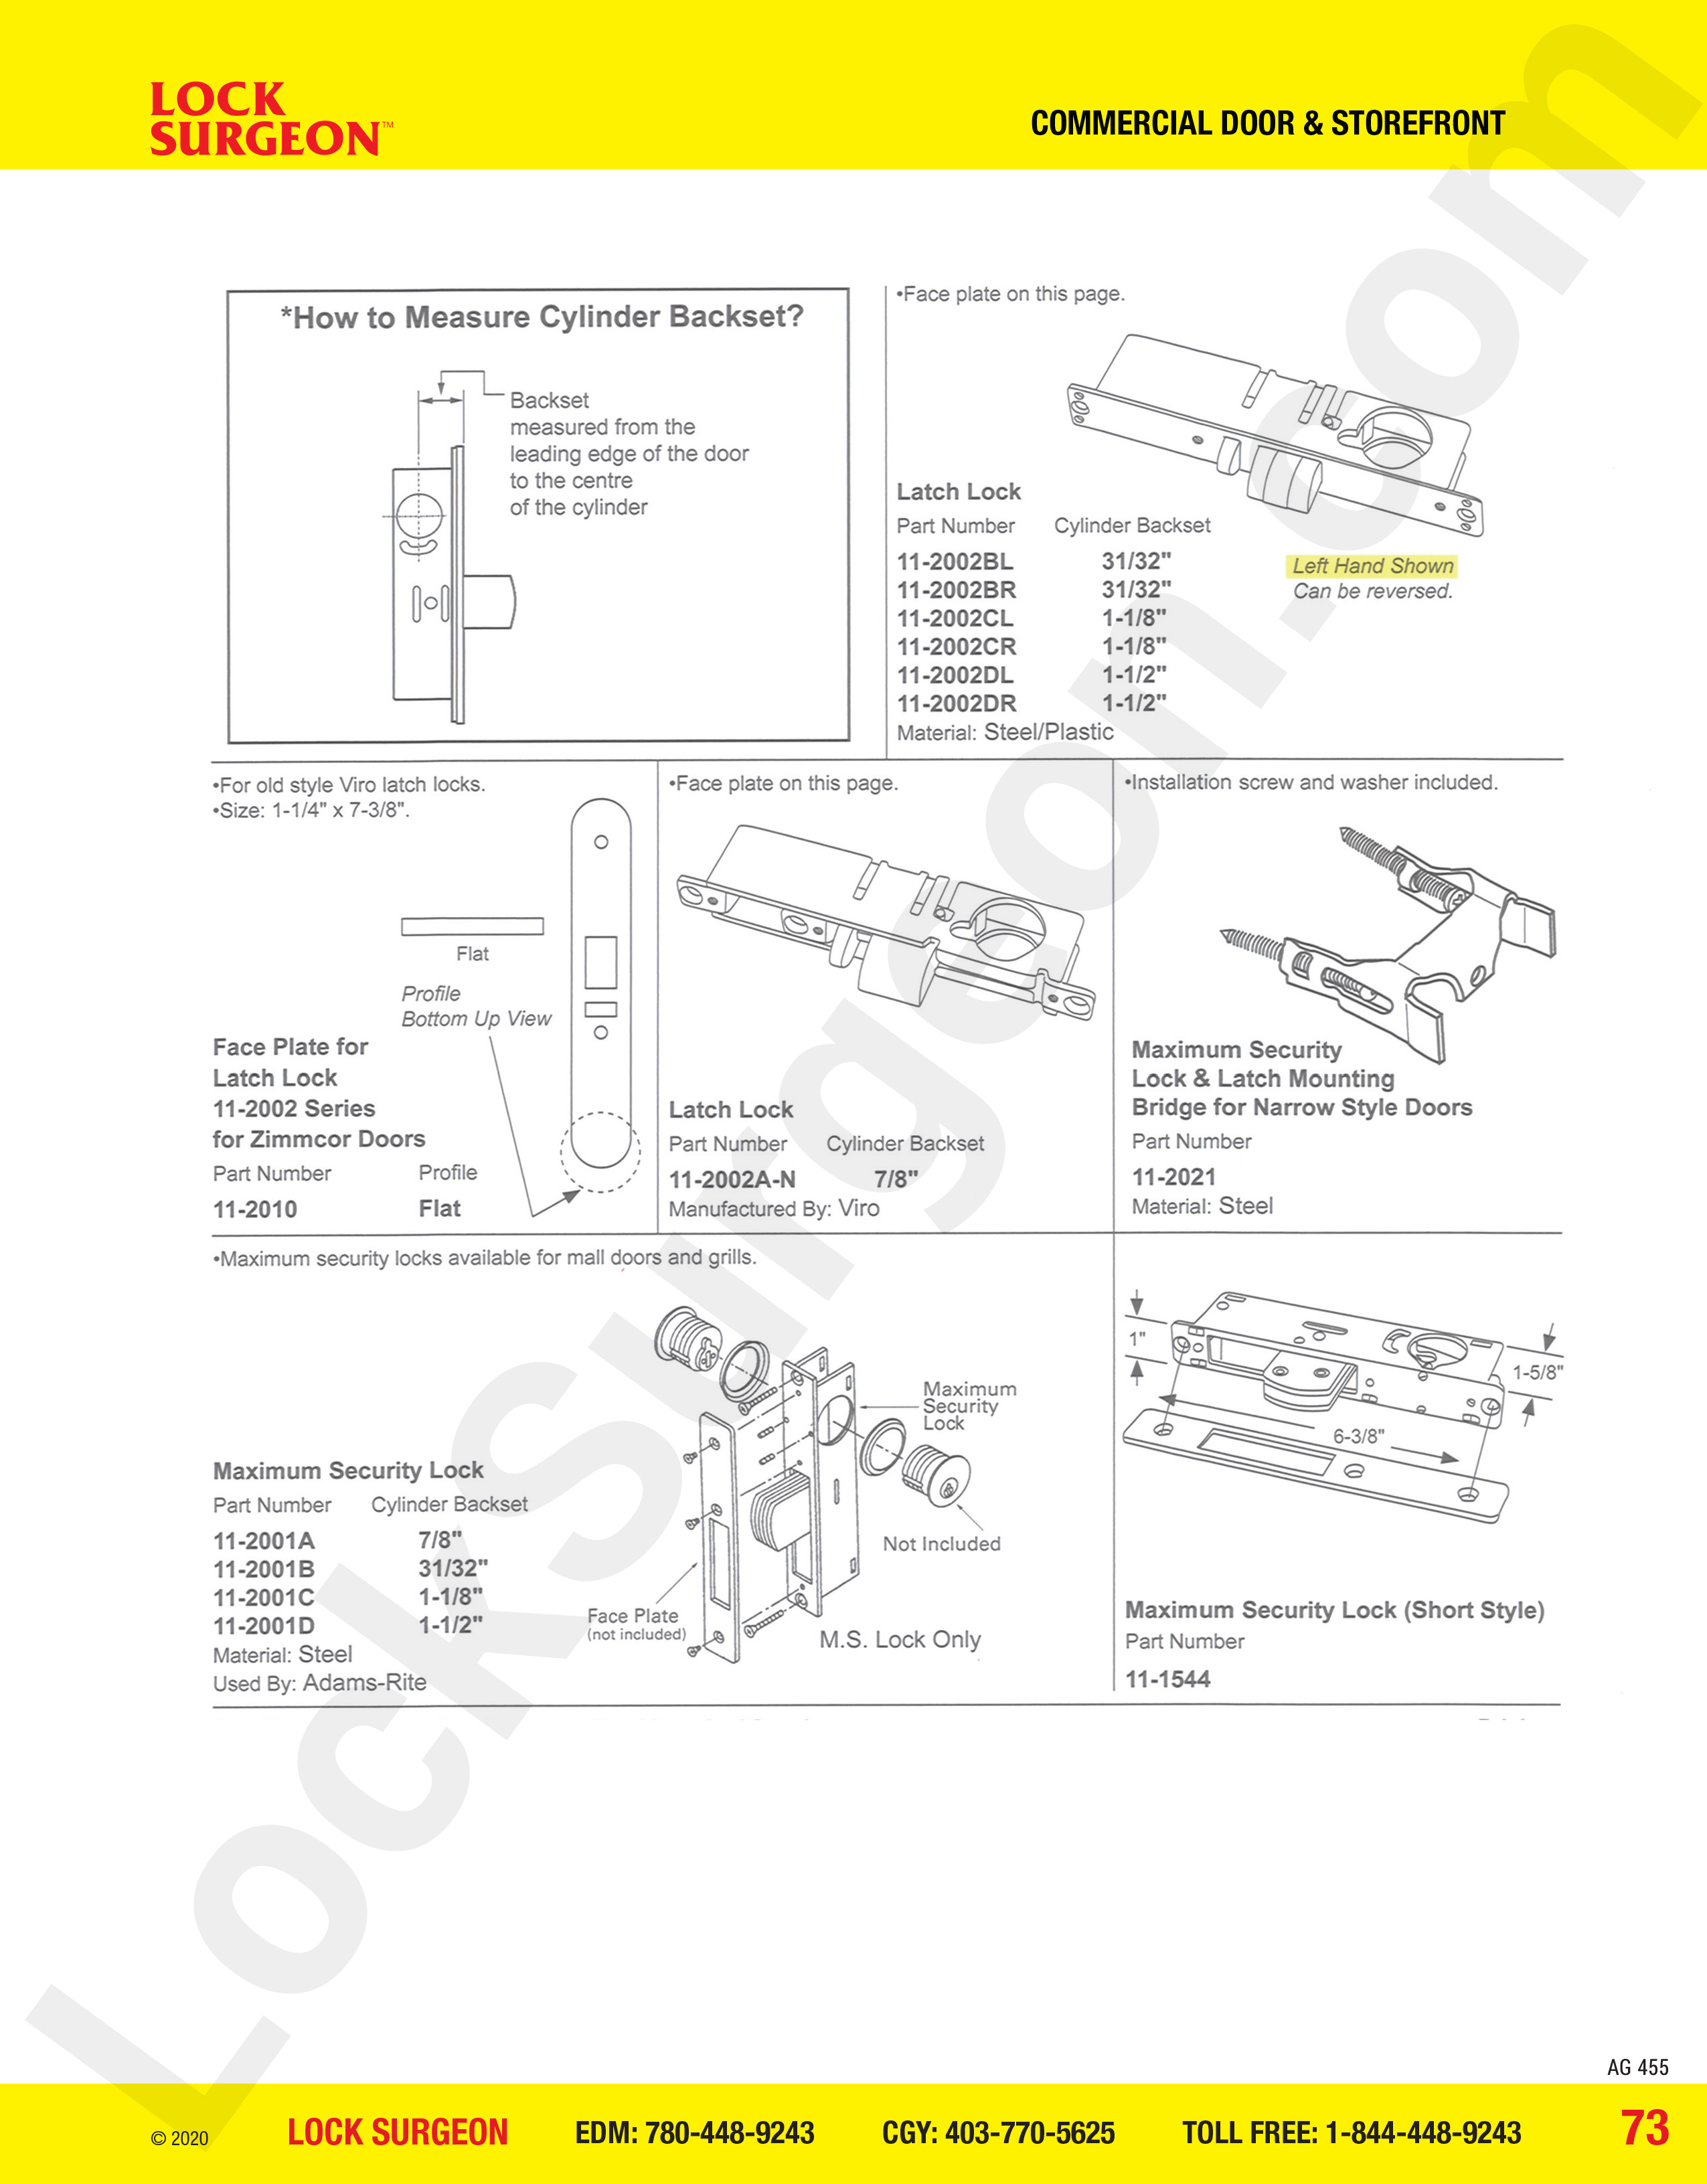 Commercial Door and Storefront parts for latch locks